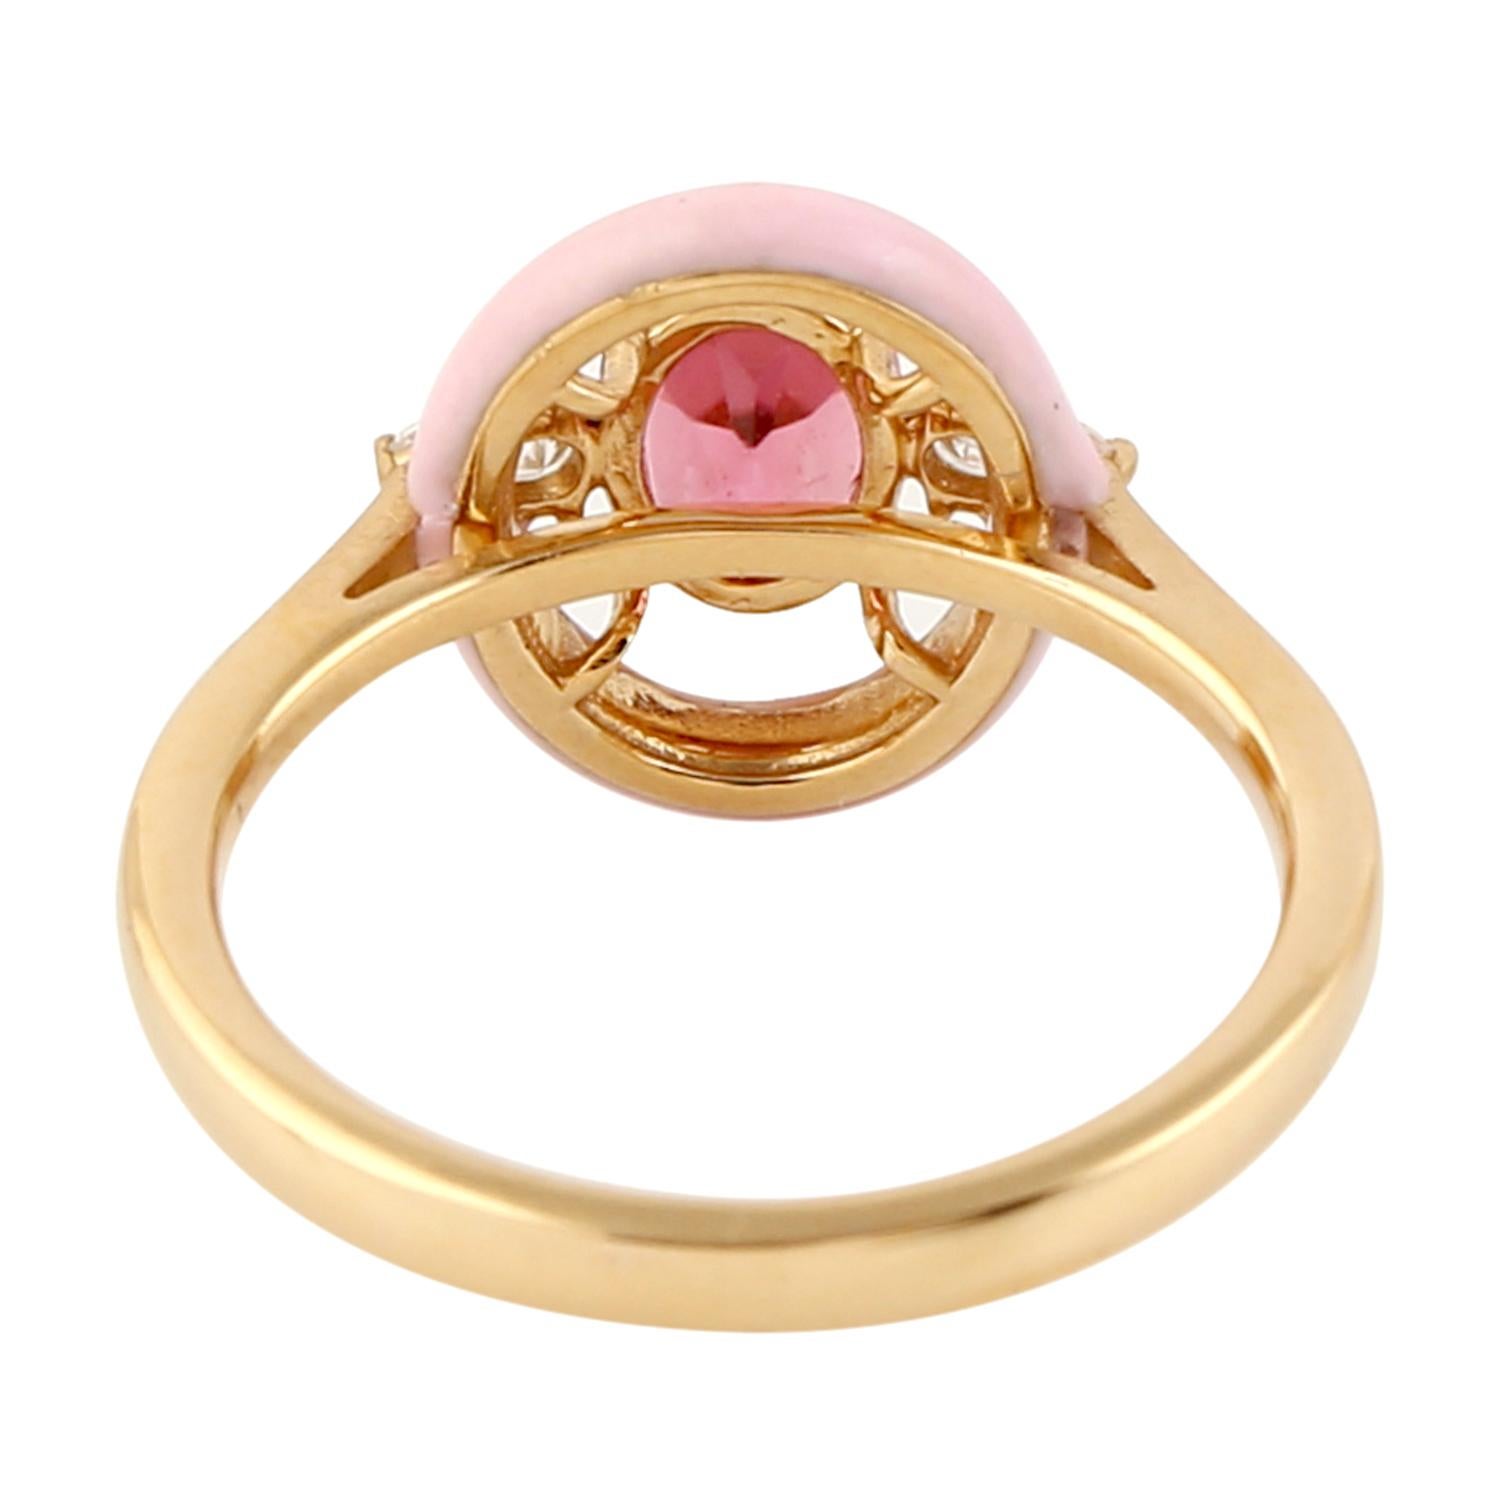 This ring has been meticulously crafted from 18-karat gold.  It is hand set with .89 carats tourmaline & .16 carats of sparkling diamonds. See other complimenting pieces.

The ring is a size 7 and may be resized to larger or smaller upon request.